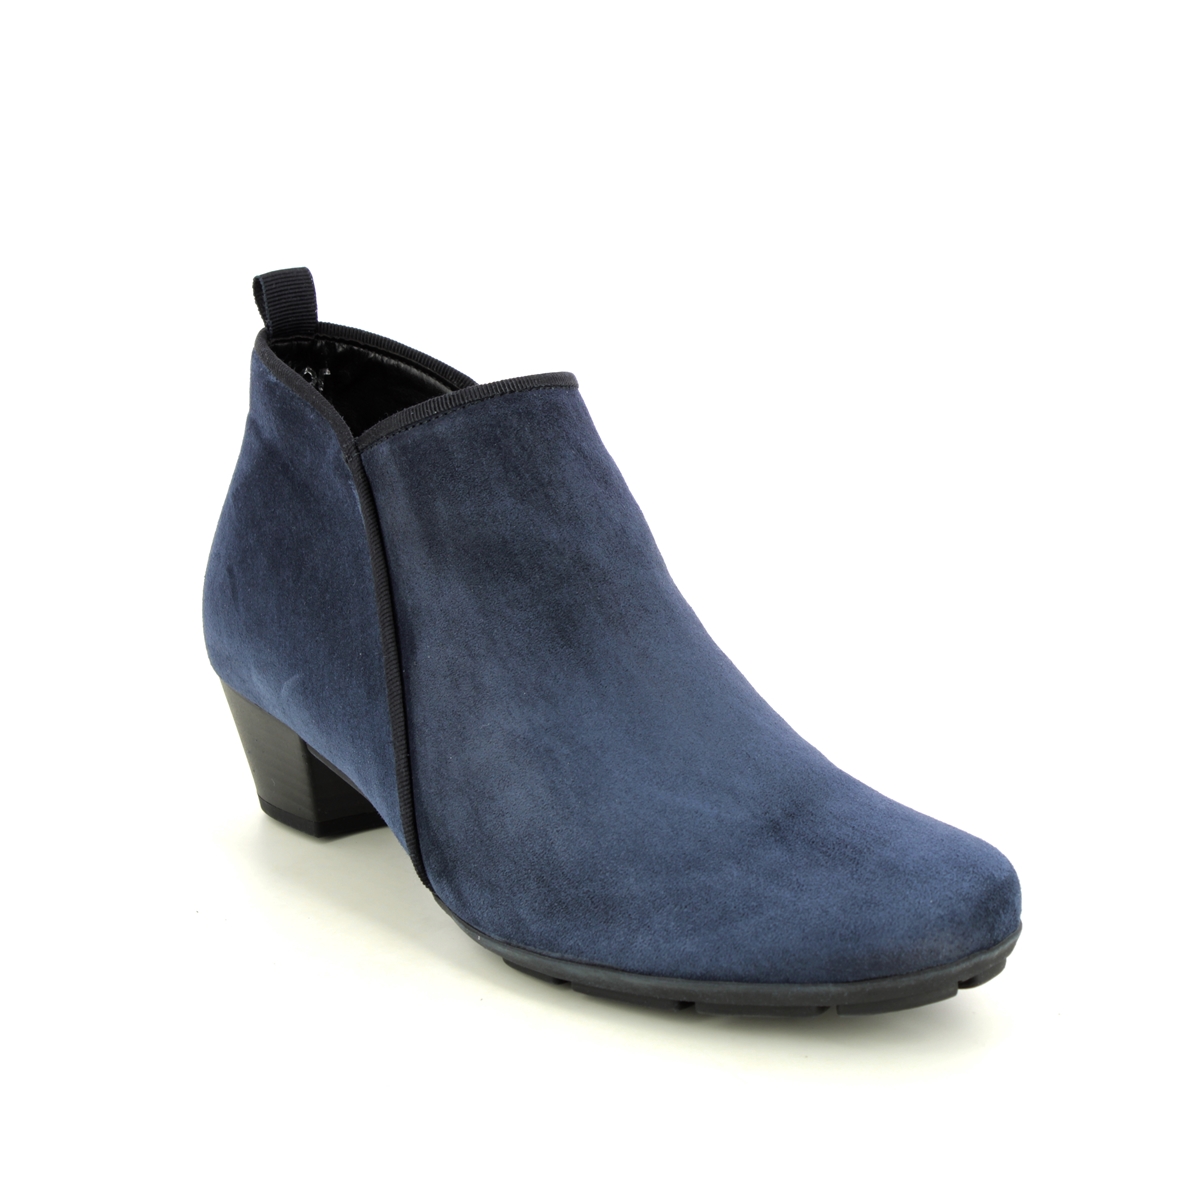 Gabor Trudy Navy Suede Womens ankle boots 35.633.16 in a Plain Leather in Size 7.5